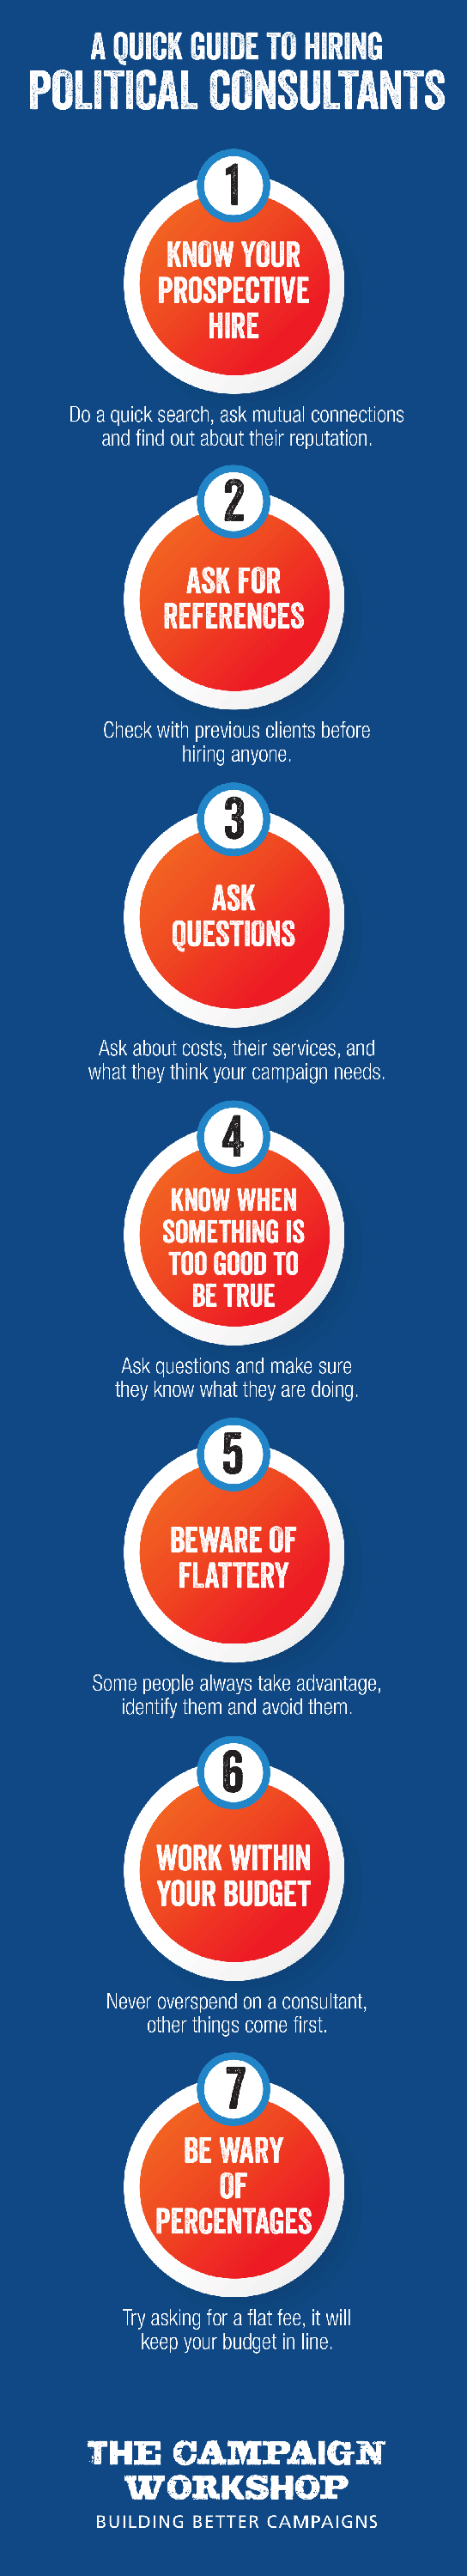 A Quick Guide to Hiring Political Consultants